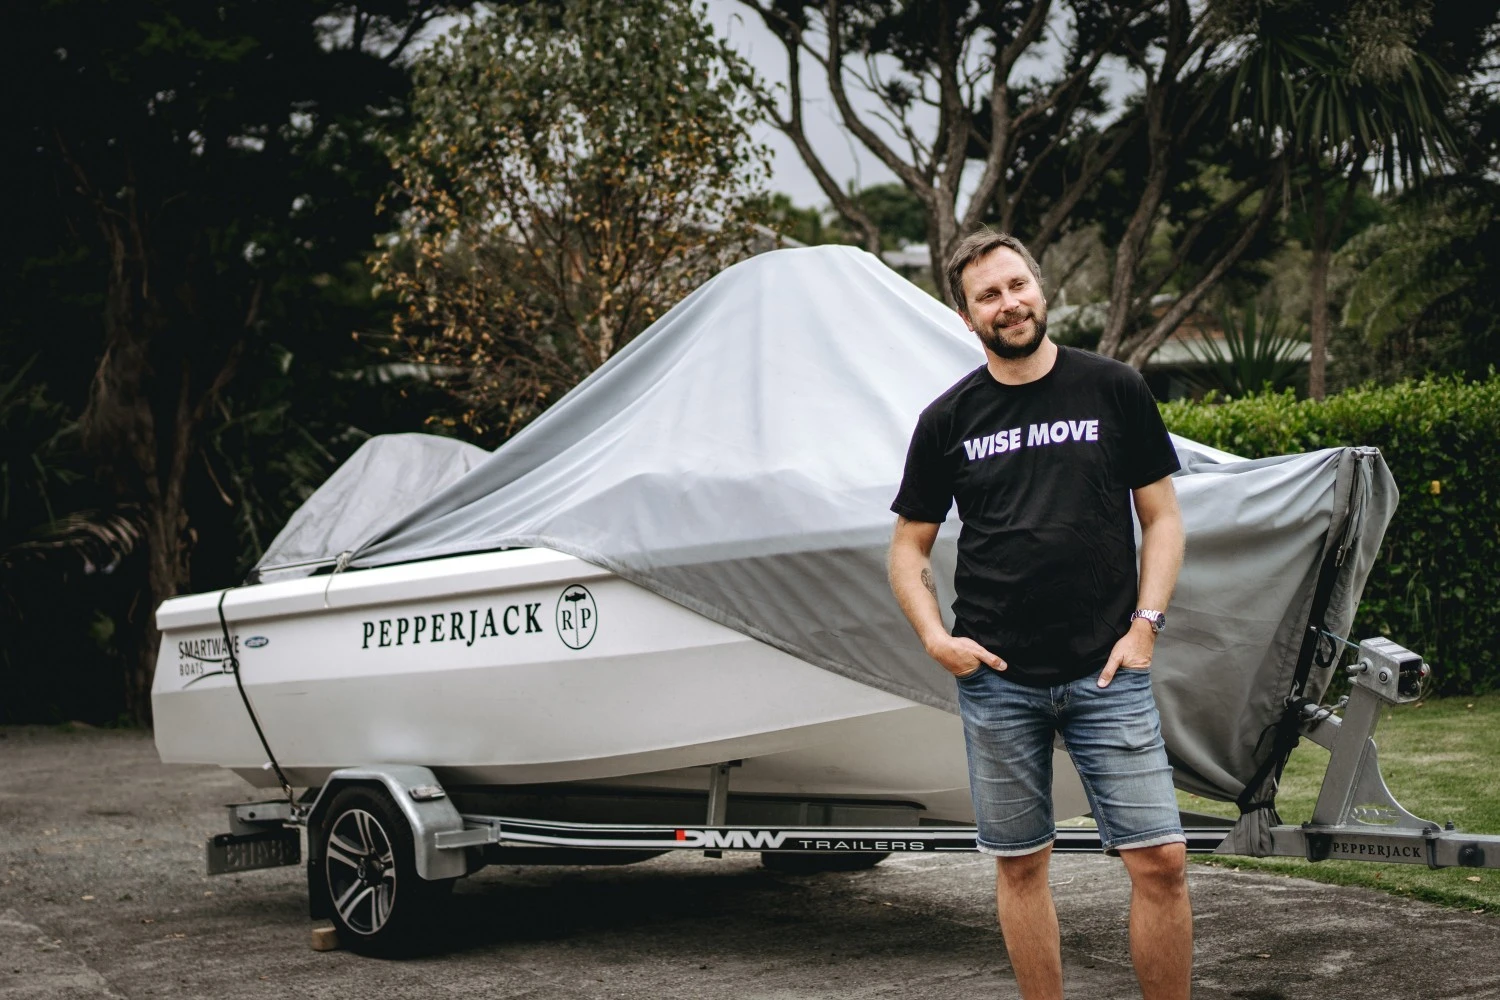 Buying a second-hand boat? Here’s what you need to check first